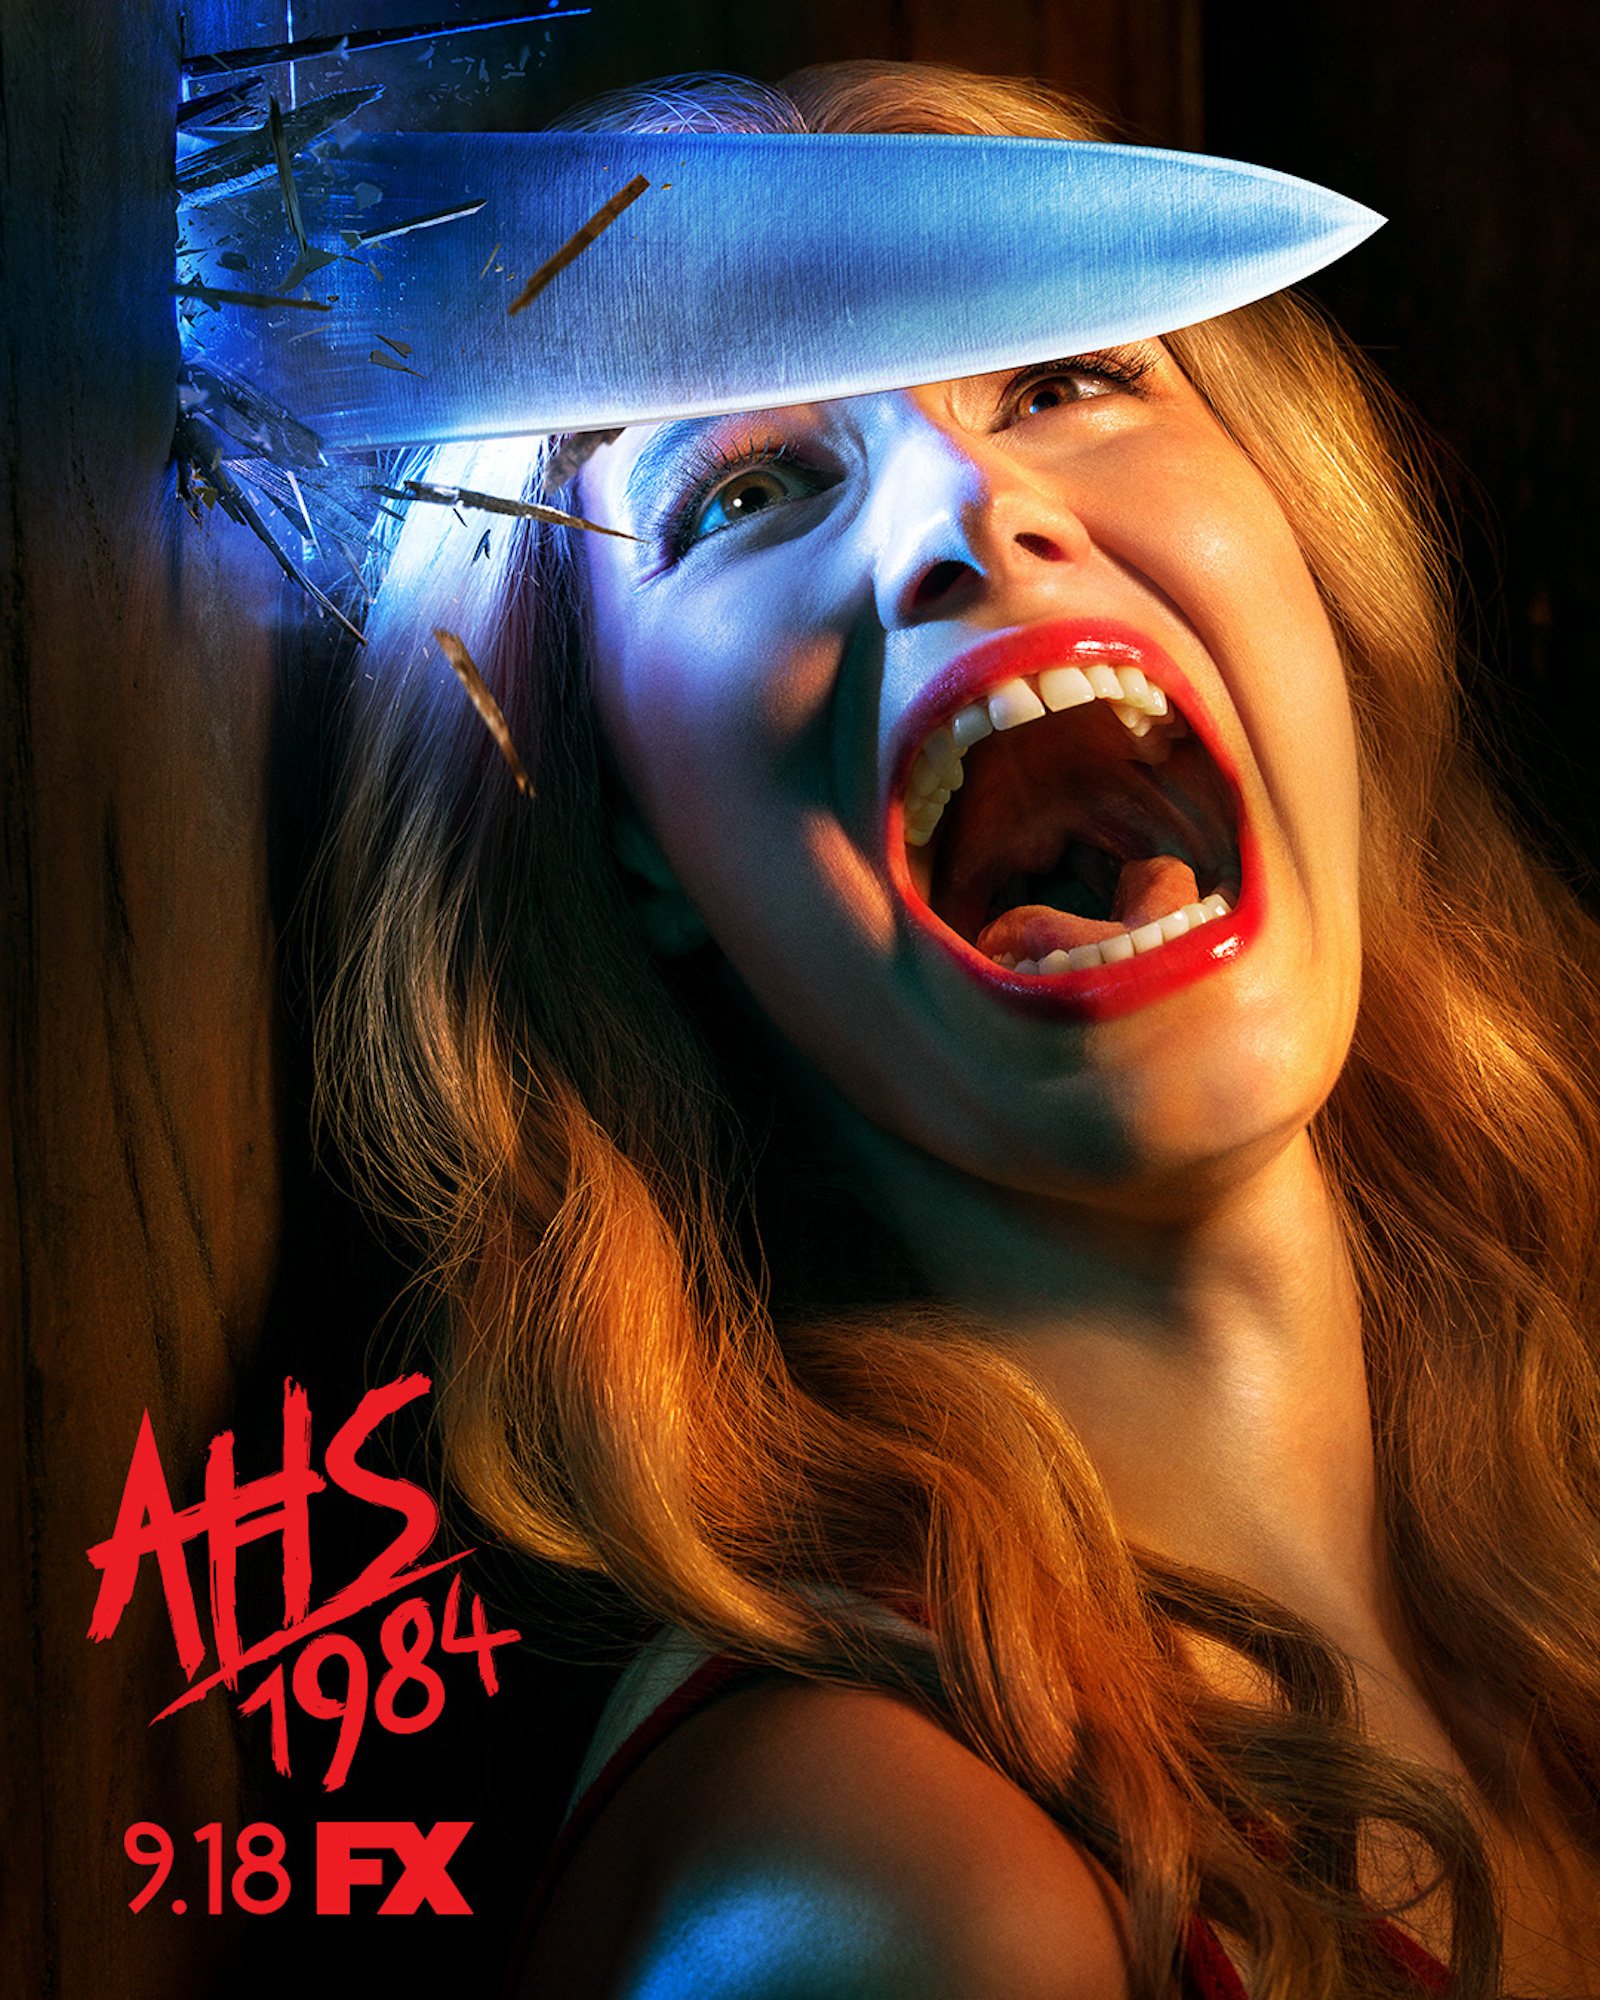 Promo image for 'American Horror Story: 1984' 